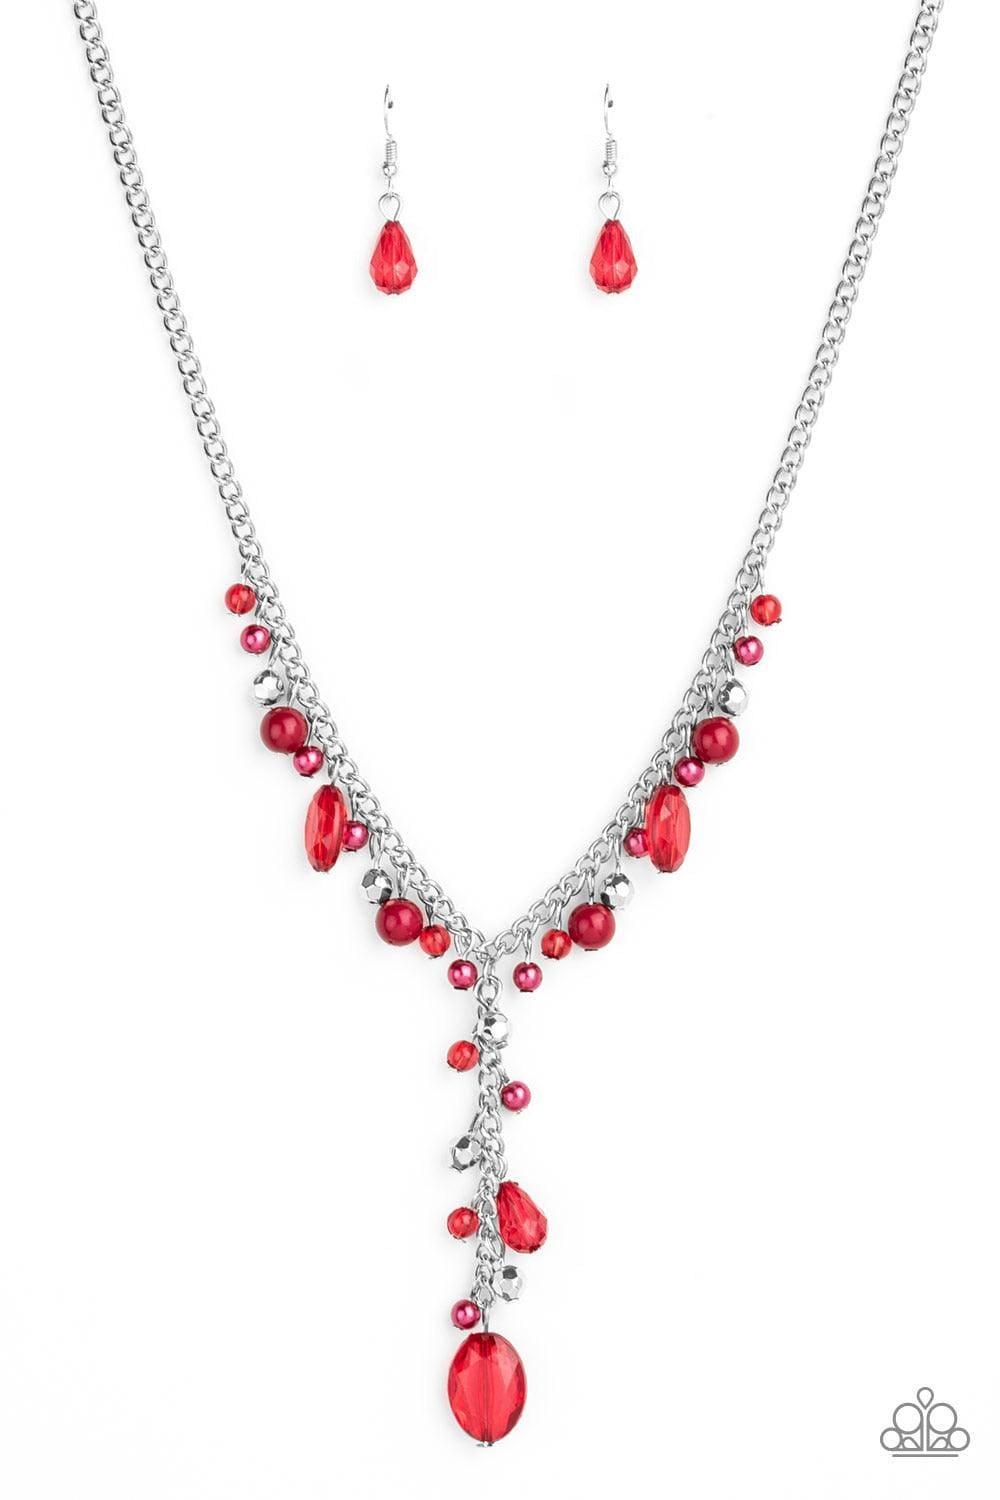 Paparazzi Accessories - Crystal Couture - Red Necklace - Bling by JessieK